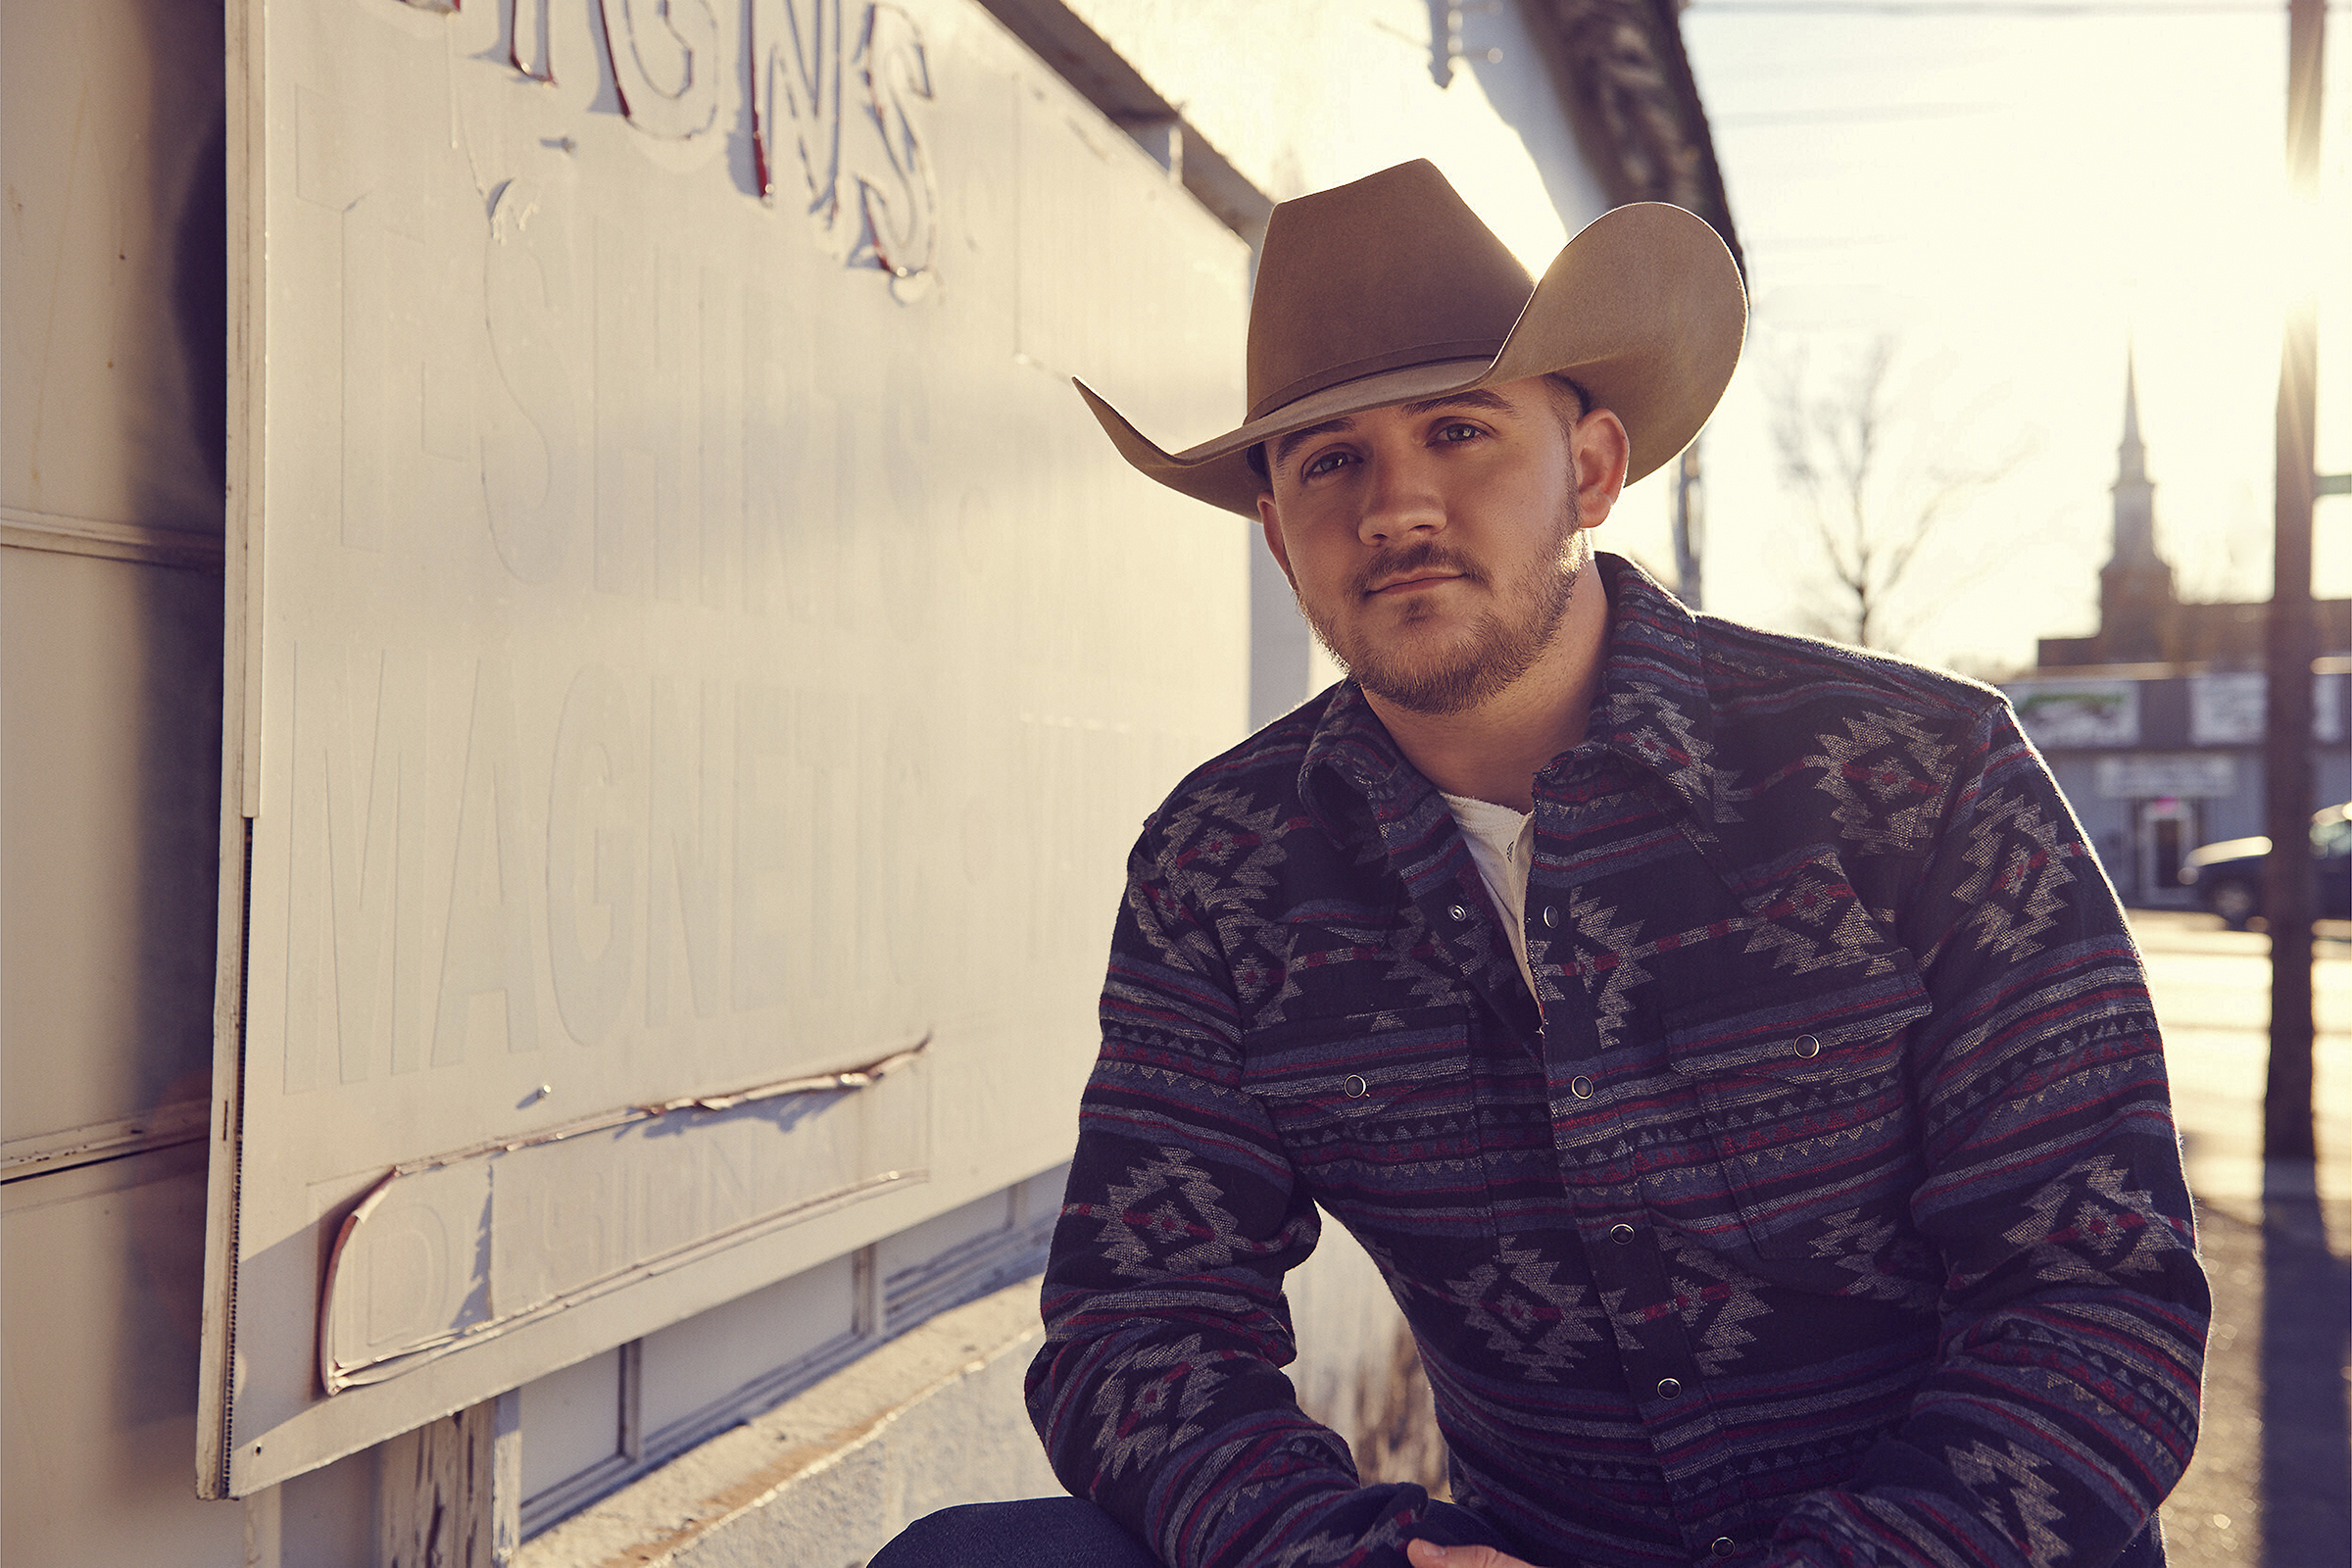 DREW PARKER RELEASES OFFICIAL MUSIC VIDEO FOR “WHILE YOU’RE GONE”